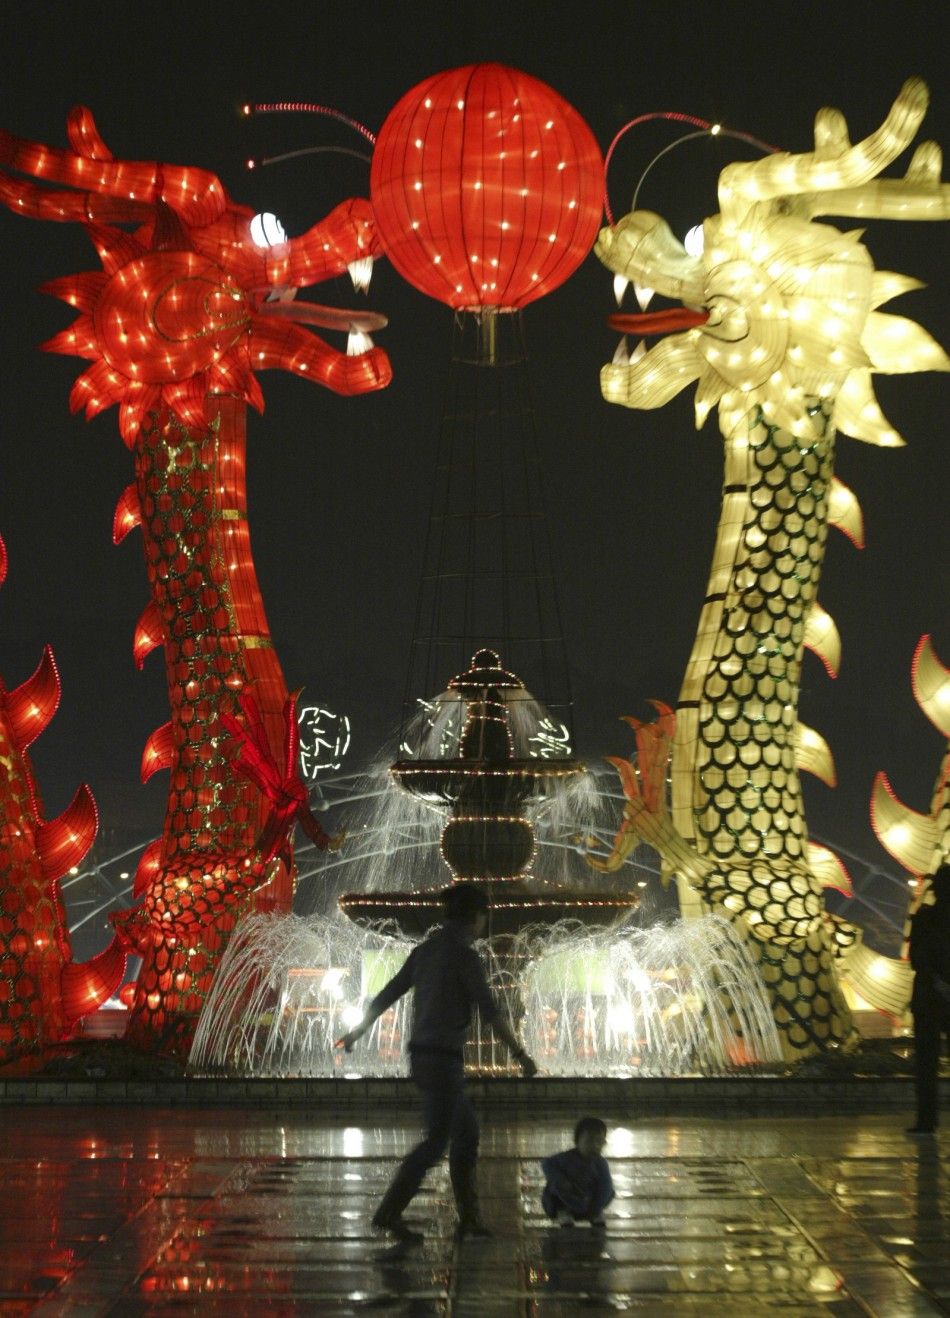 A dragon decoration is displayed at a park to celebrate Chinese New Year in Guangzhou